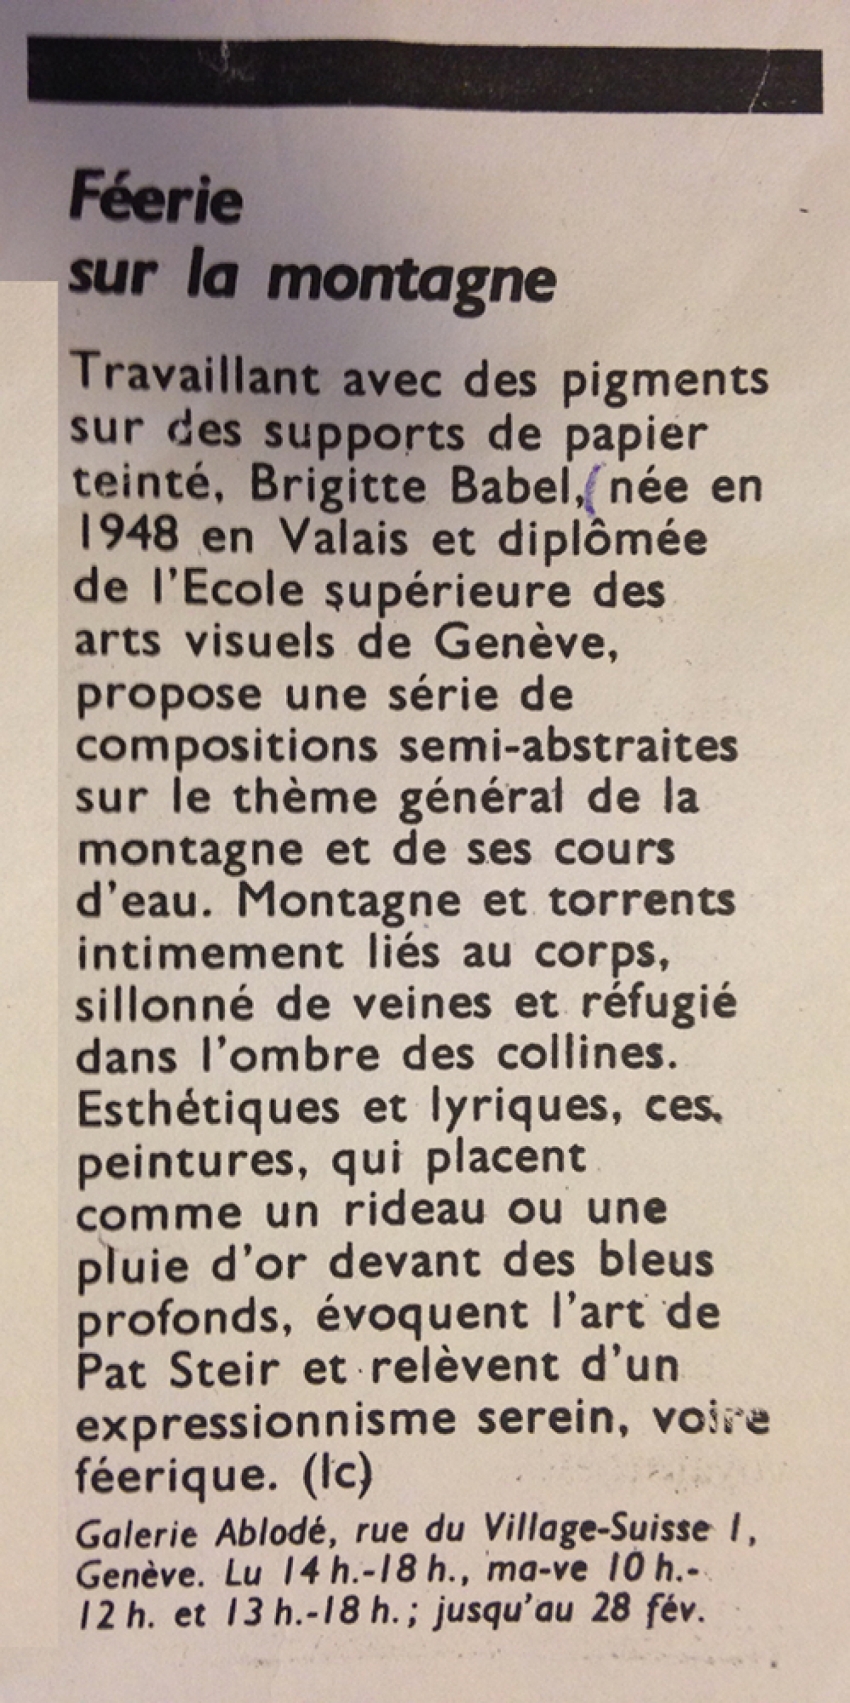 Hebdo n°6 - février 1992 - Laurence Chauvy